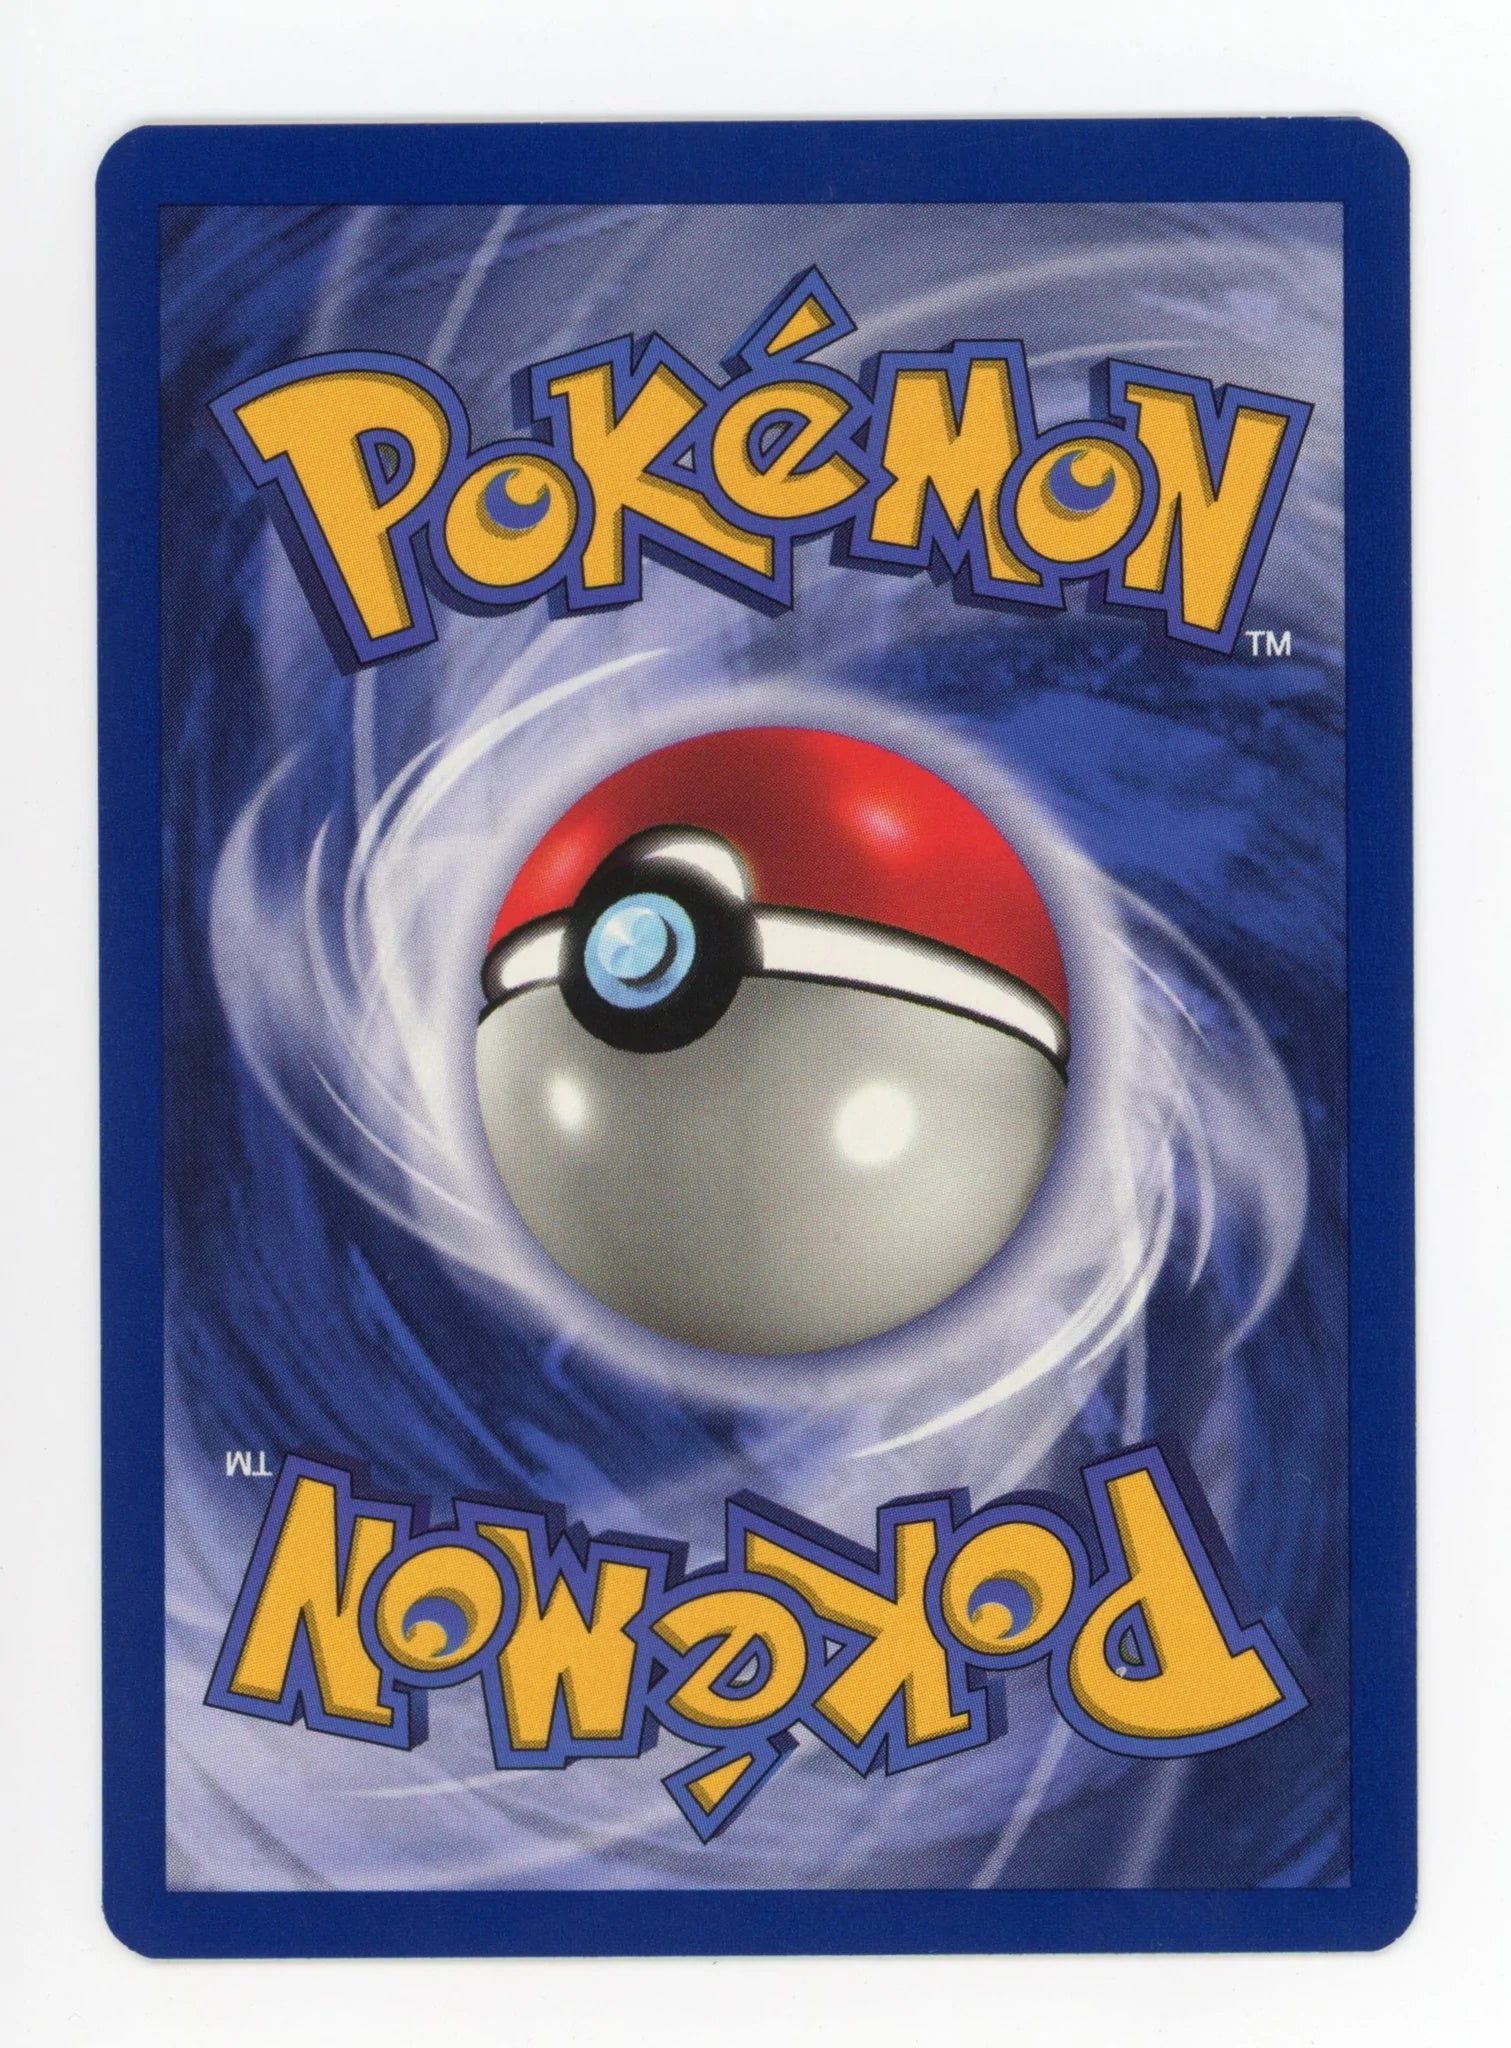 Pokemon TCG: 3 Booster Packs - 30 Cards Total| Value Pack Includes 3 Blister Packs of Random Cards | 100% Authentic Branded Pokemon Expansion Packs | Random Chance at Rares & Holofoils - image 2 of 4